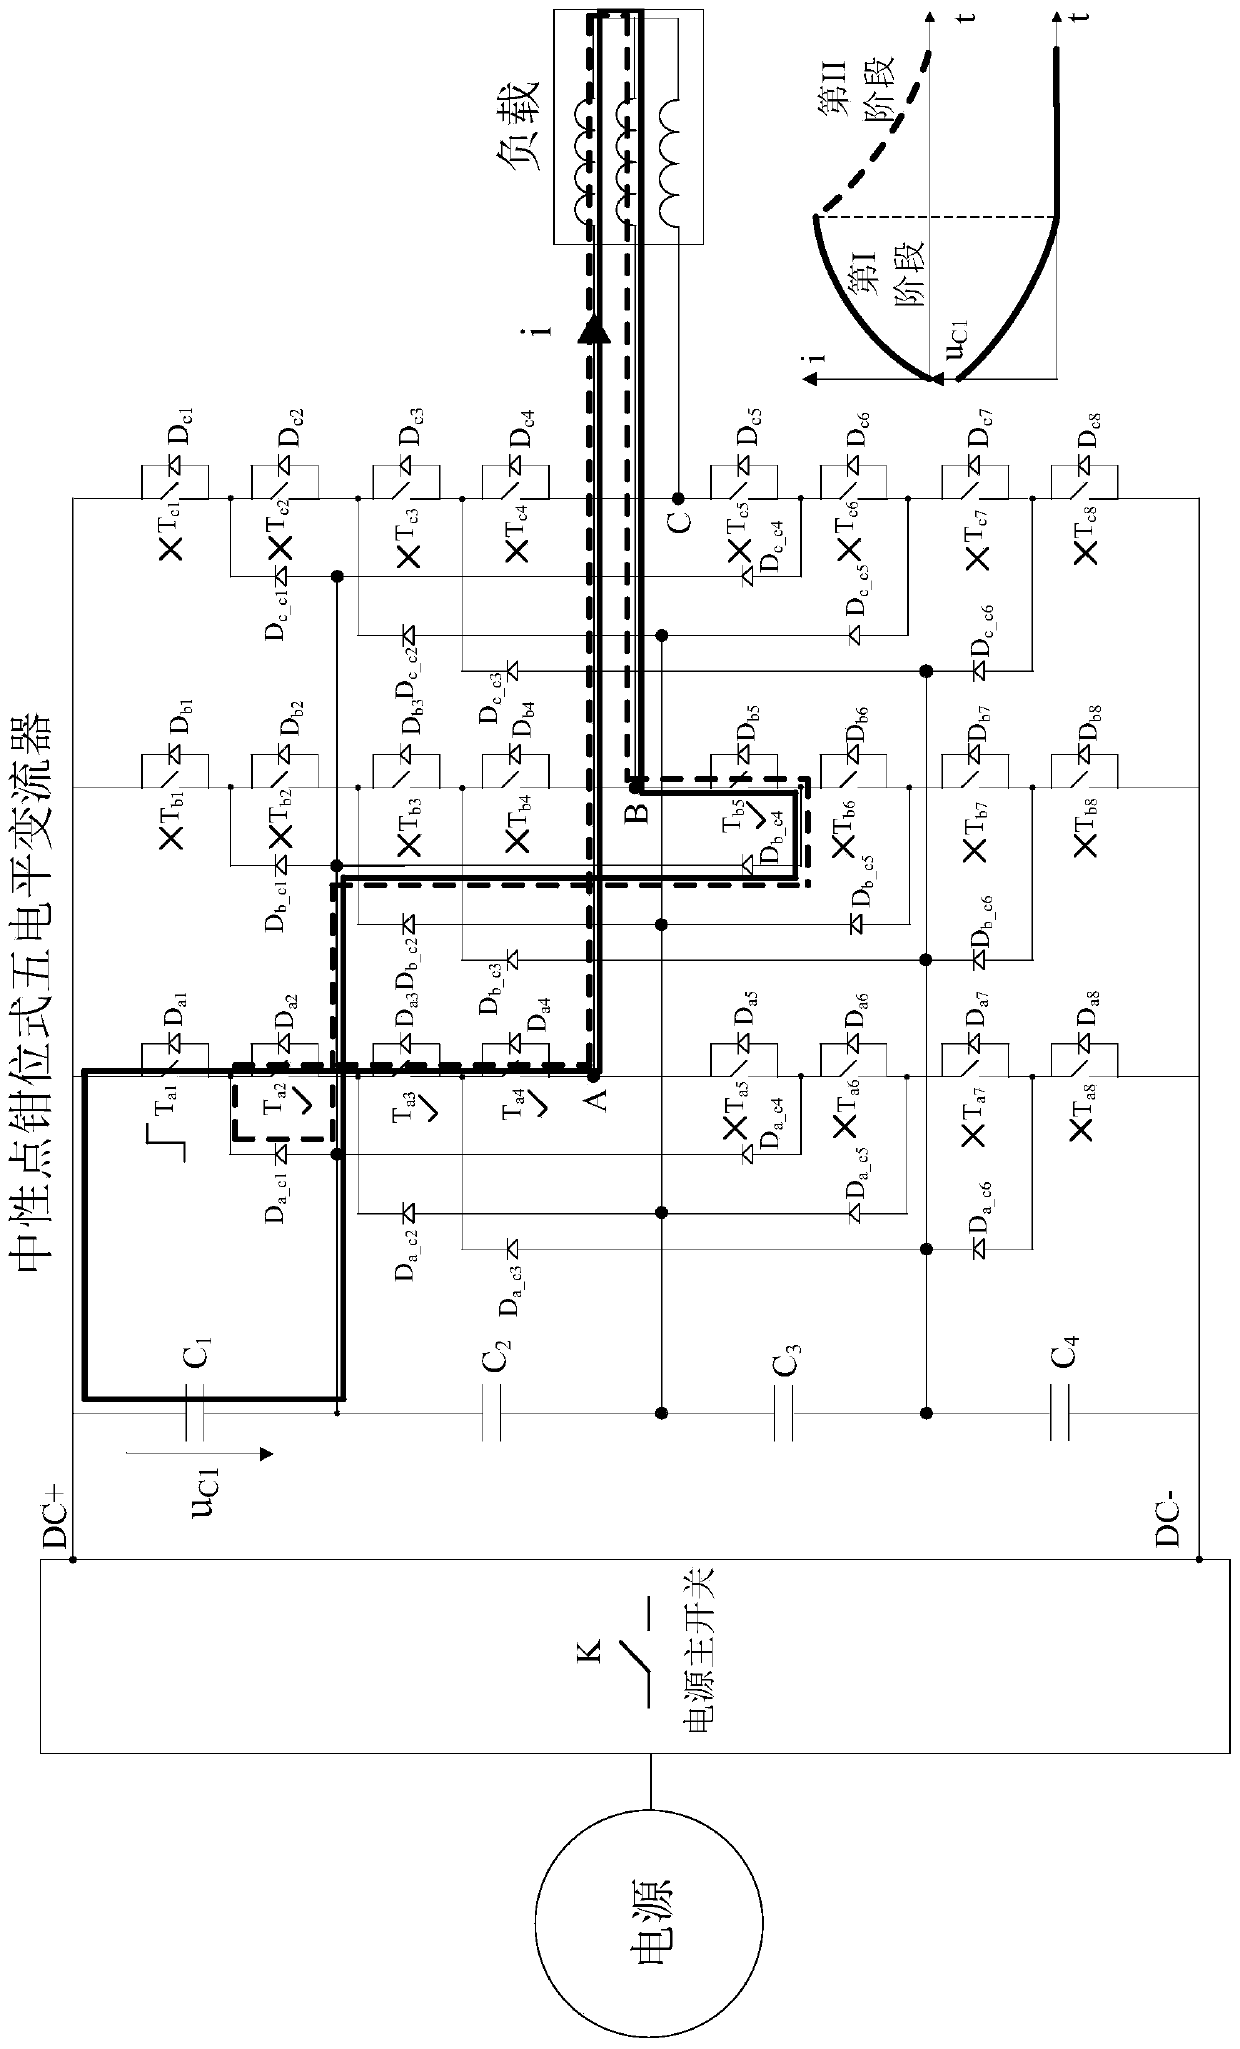 Neutral point clamping type multi-level converter direct current capacitor state detection method